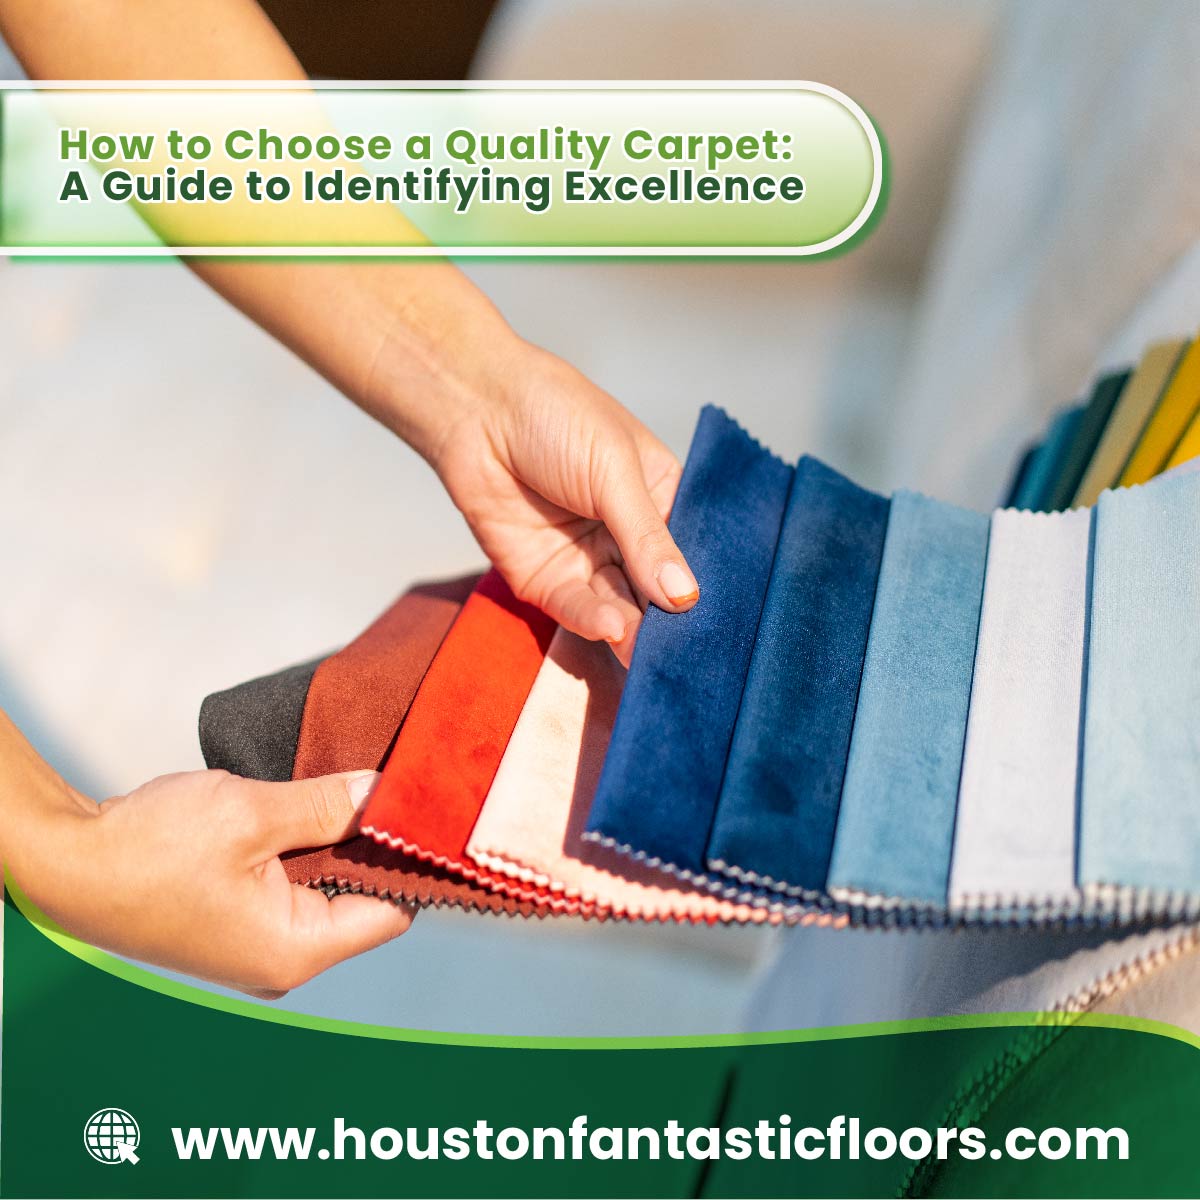 How to Choose a Quality Carpet: A Guide to Identifying Excellence